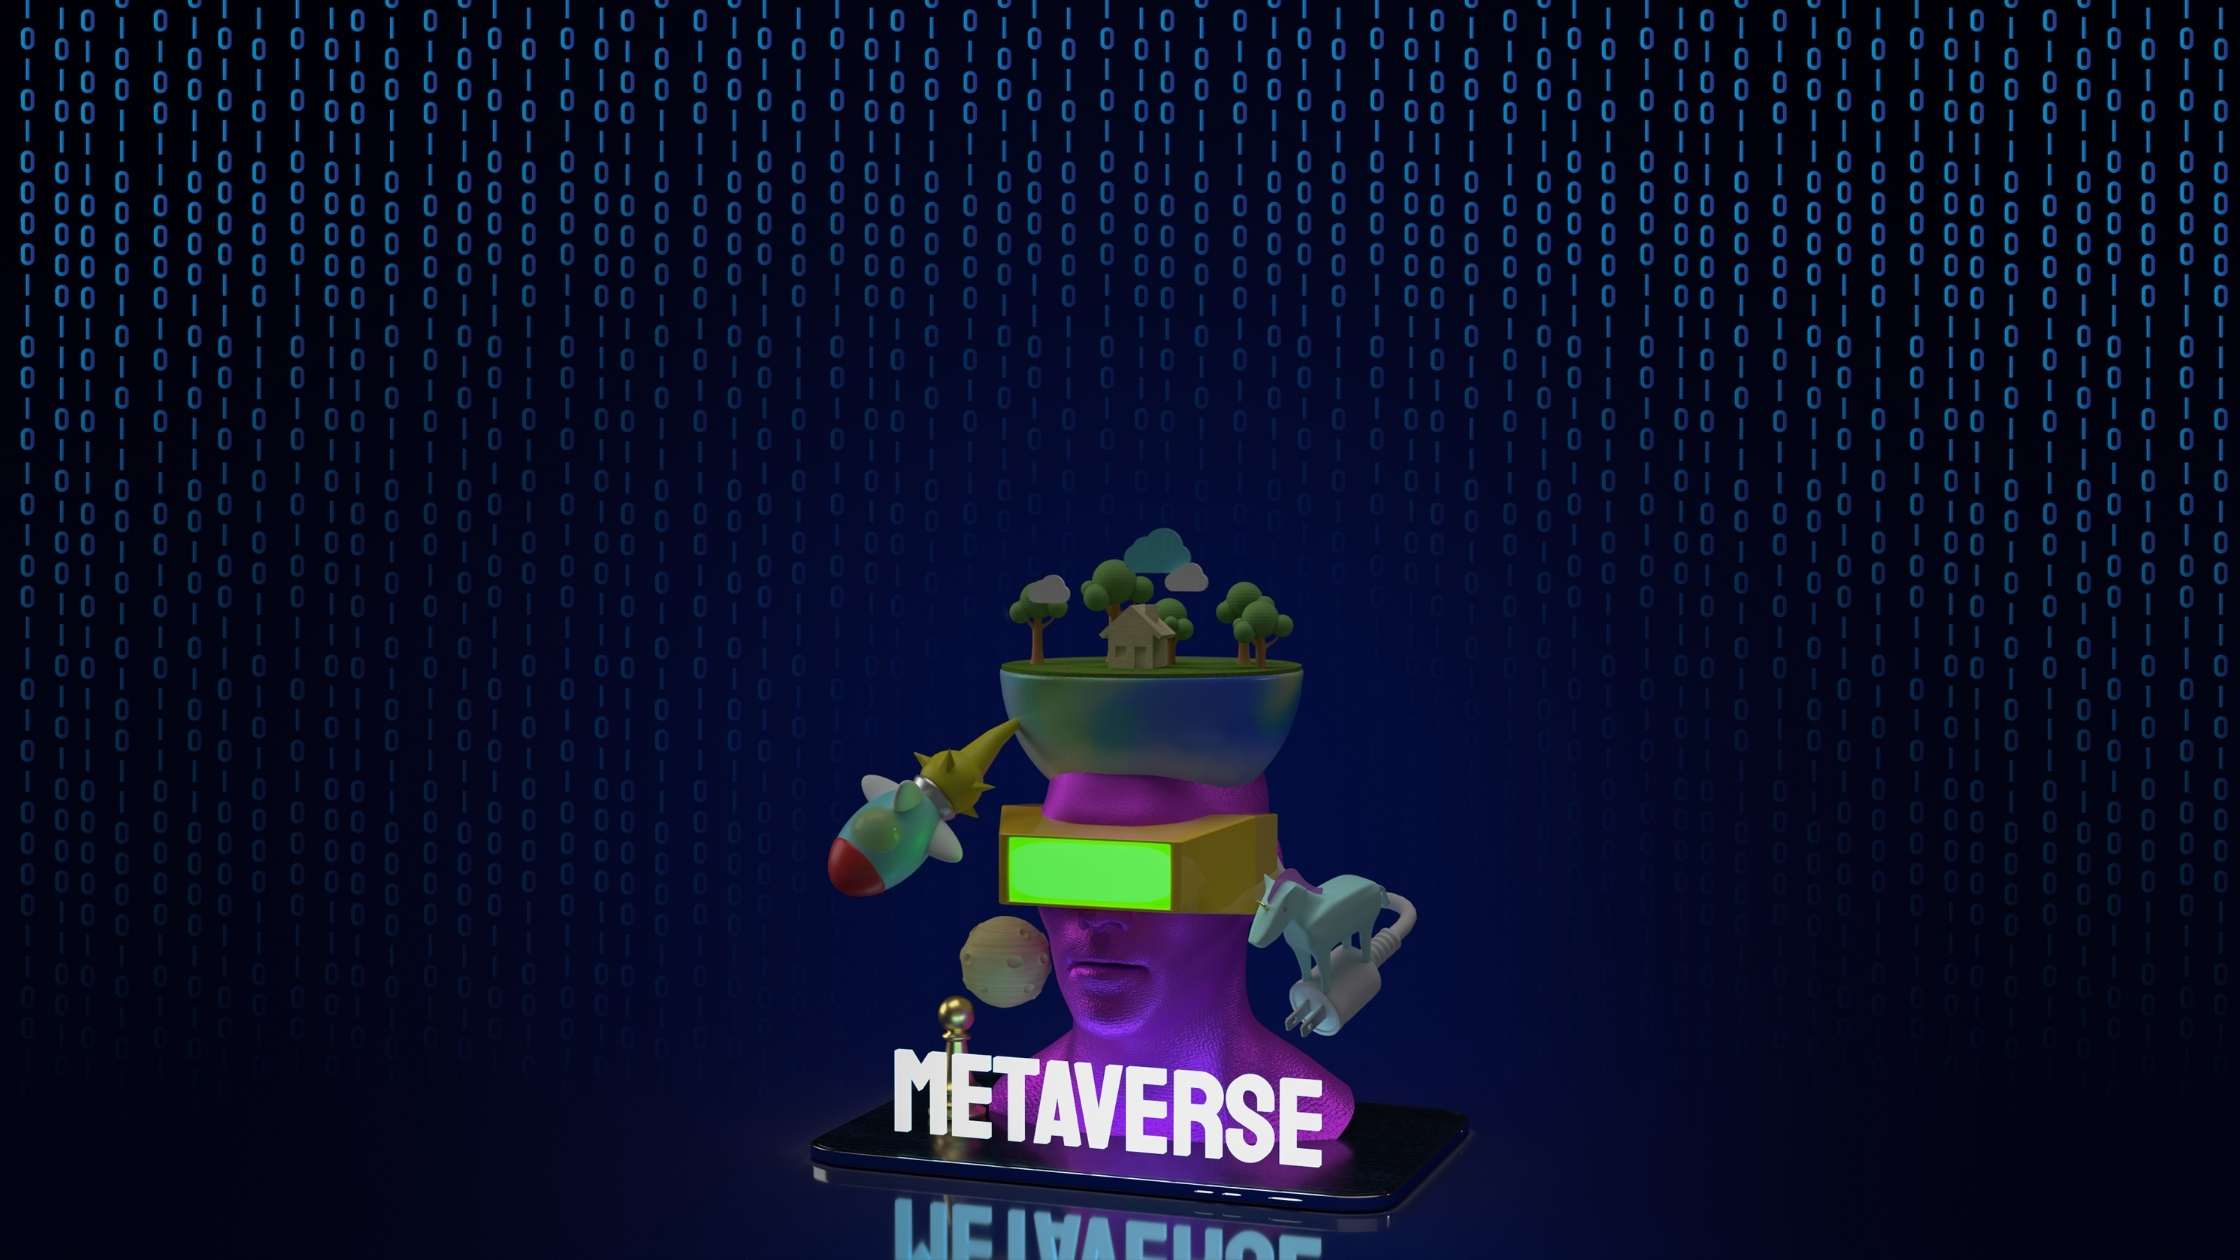 The Metaverse Will Have NFTs With Utility in 2022